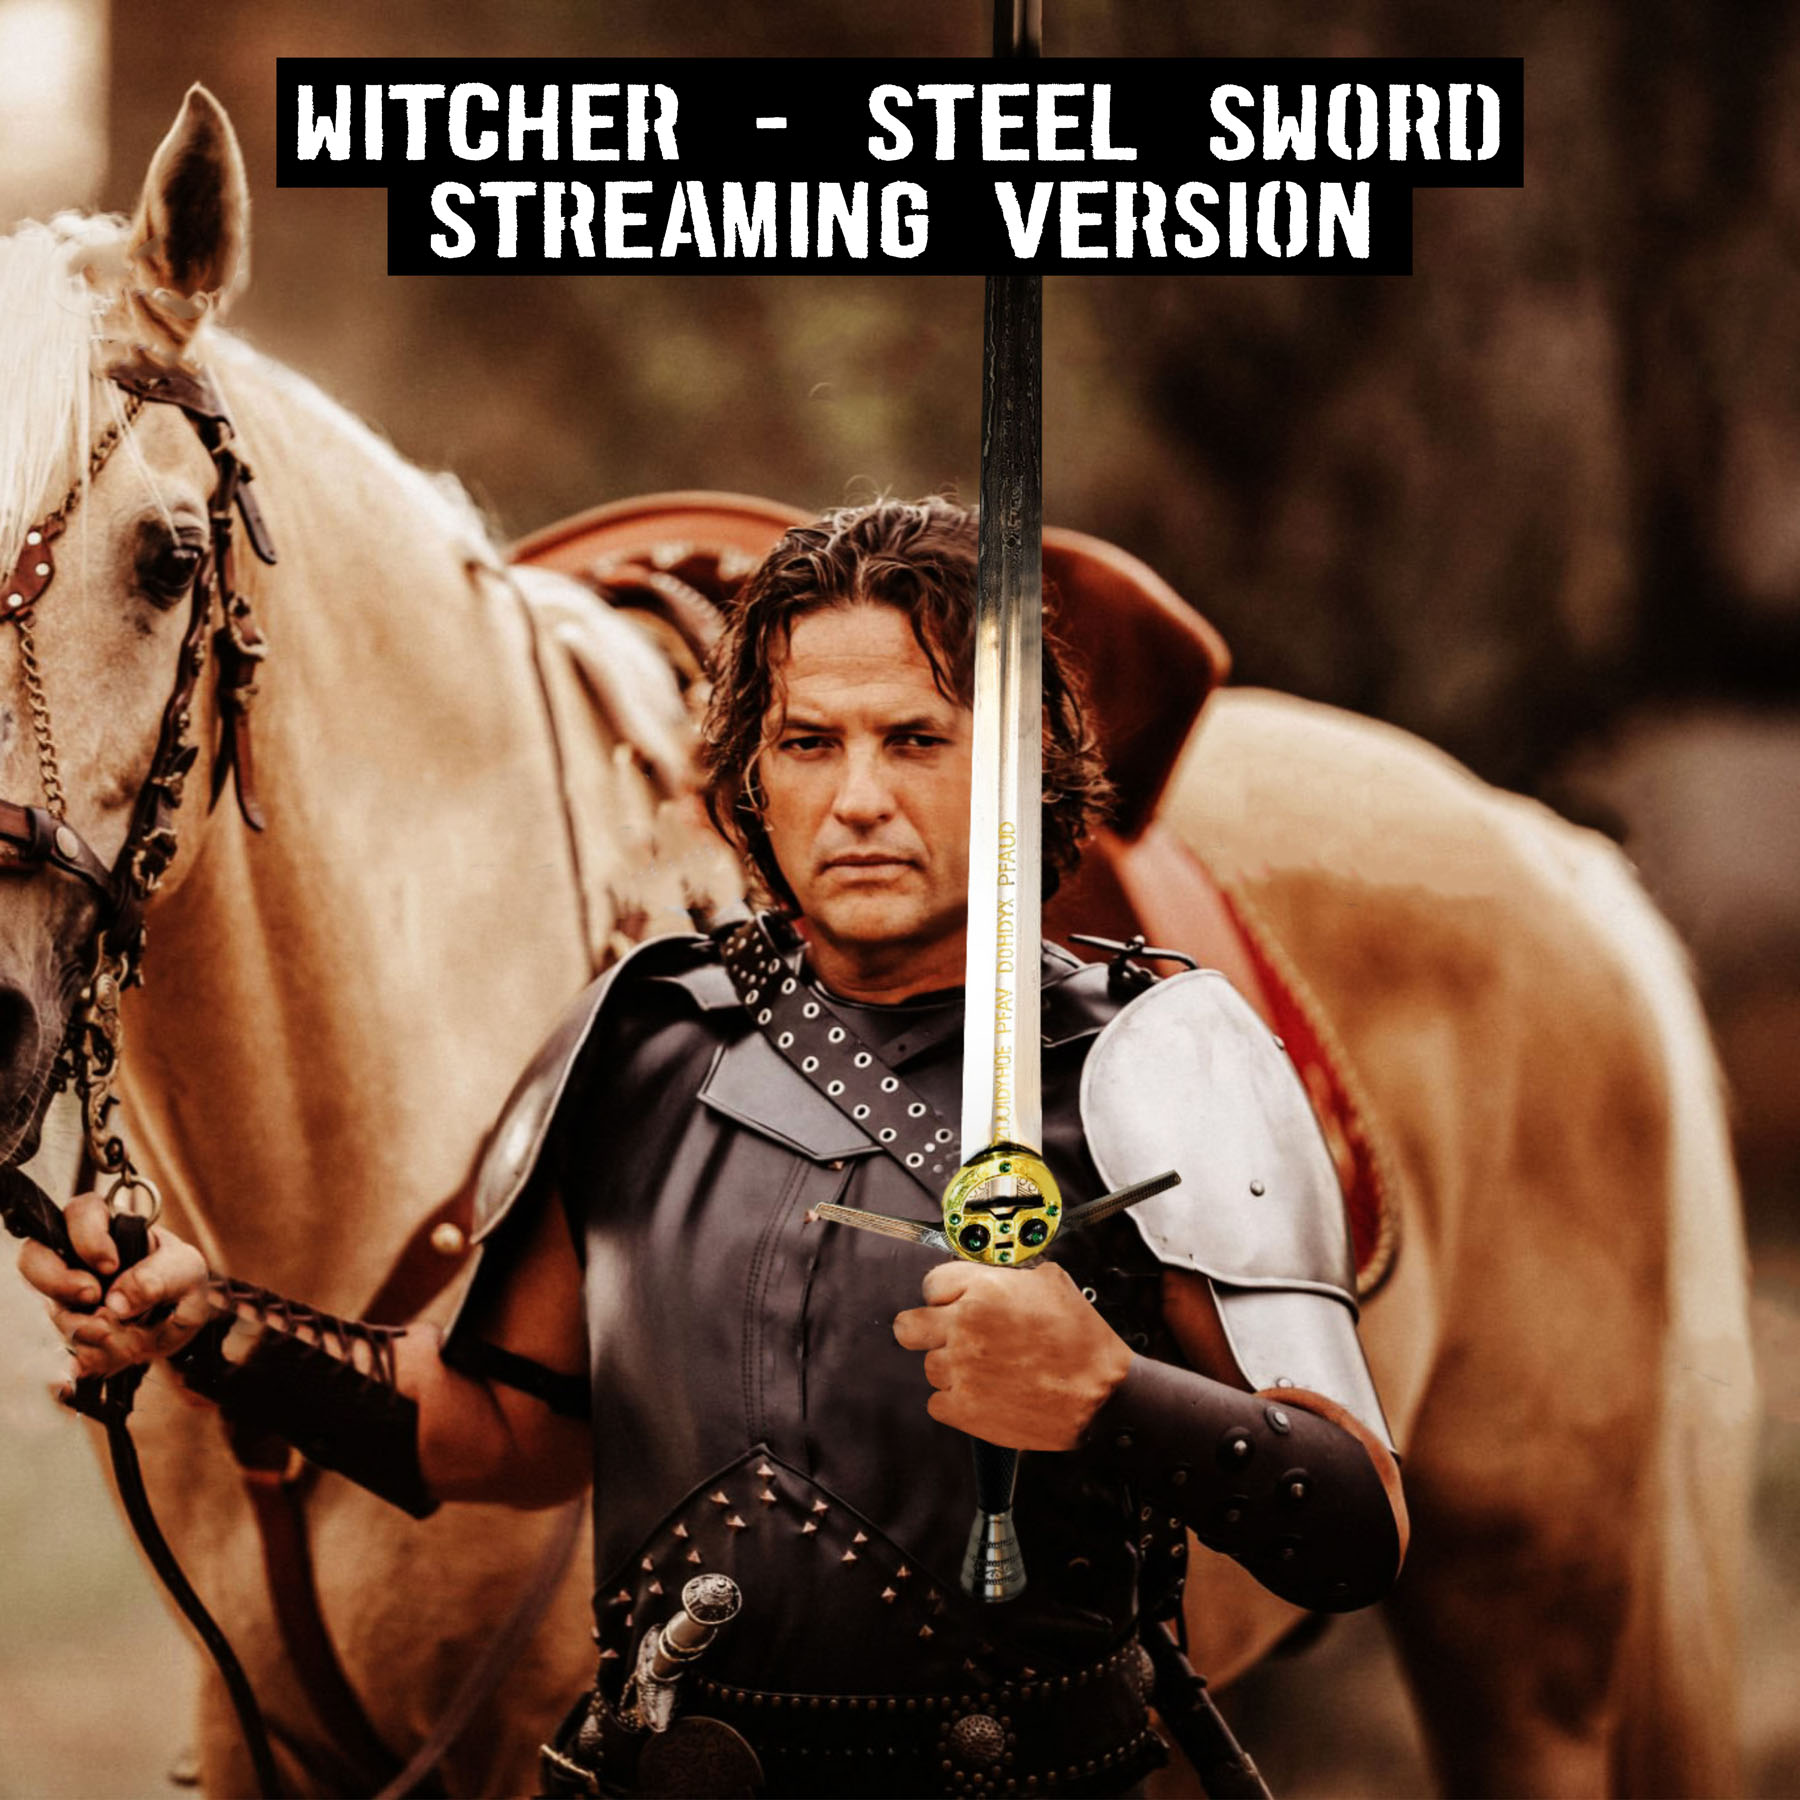 Witcher - steel sword with scabbard - handforged & folded, Netflix version